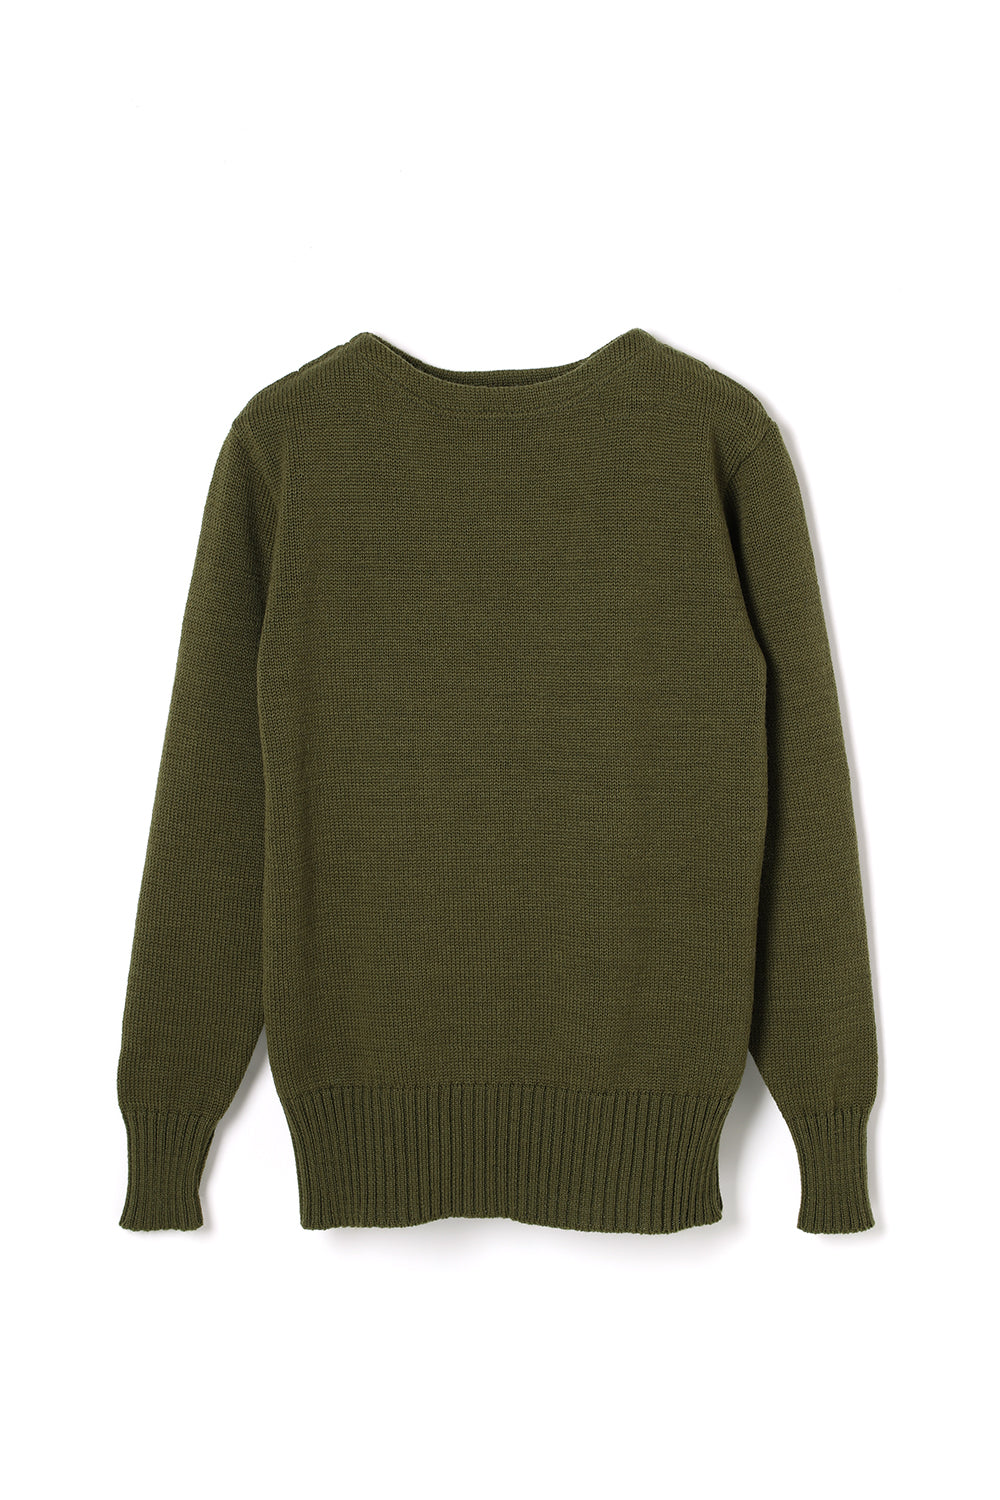 Lot.725 Boat Neck Sweater -Olive-